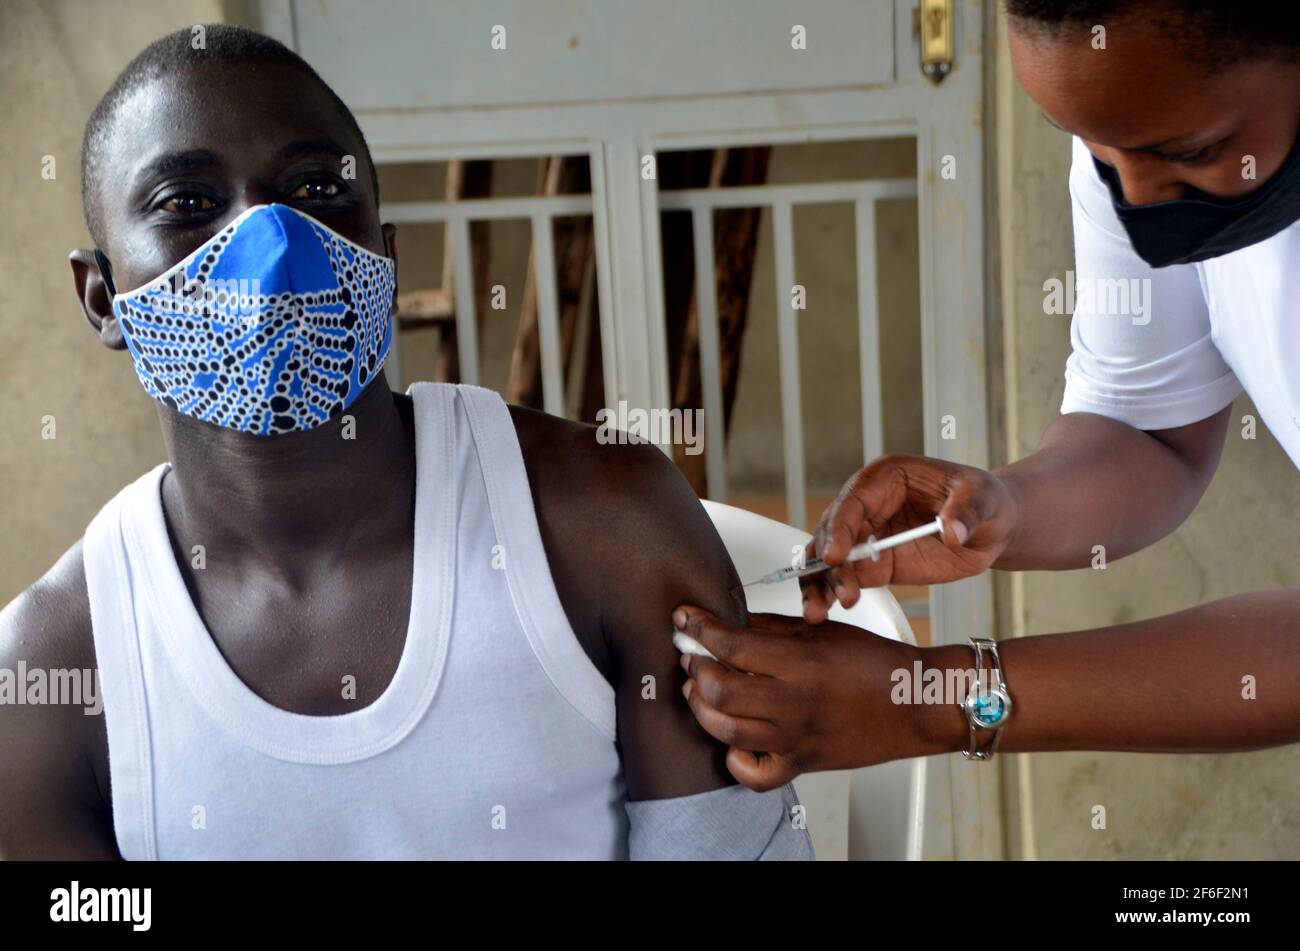 Kampala, Uganda. 31st Mar, 2021. A teacher receives a dose of COVID-19 vaccine at a health center in Kampala, capital of Uganda, March 31, 2021. Uganda launched the first phase of COVID-19 vaccination campaign on March 10, targeting high risk groups in the east African country. The ministry of health targets to vaccinate more than 21.9 million people who face the highest risk of the infection, which include health workers, teachers, security personnel, elderly and those with underlying medical conditions. Credit: Nicholas Kajoba/Xinhua/Alamy Live News Stock Photo